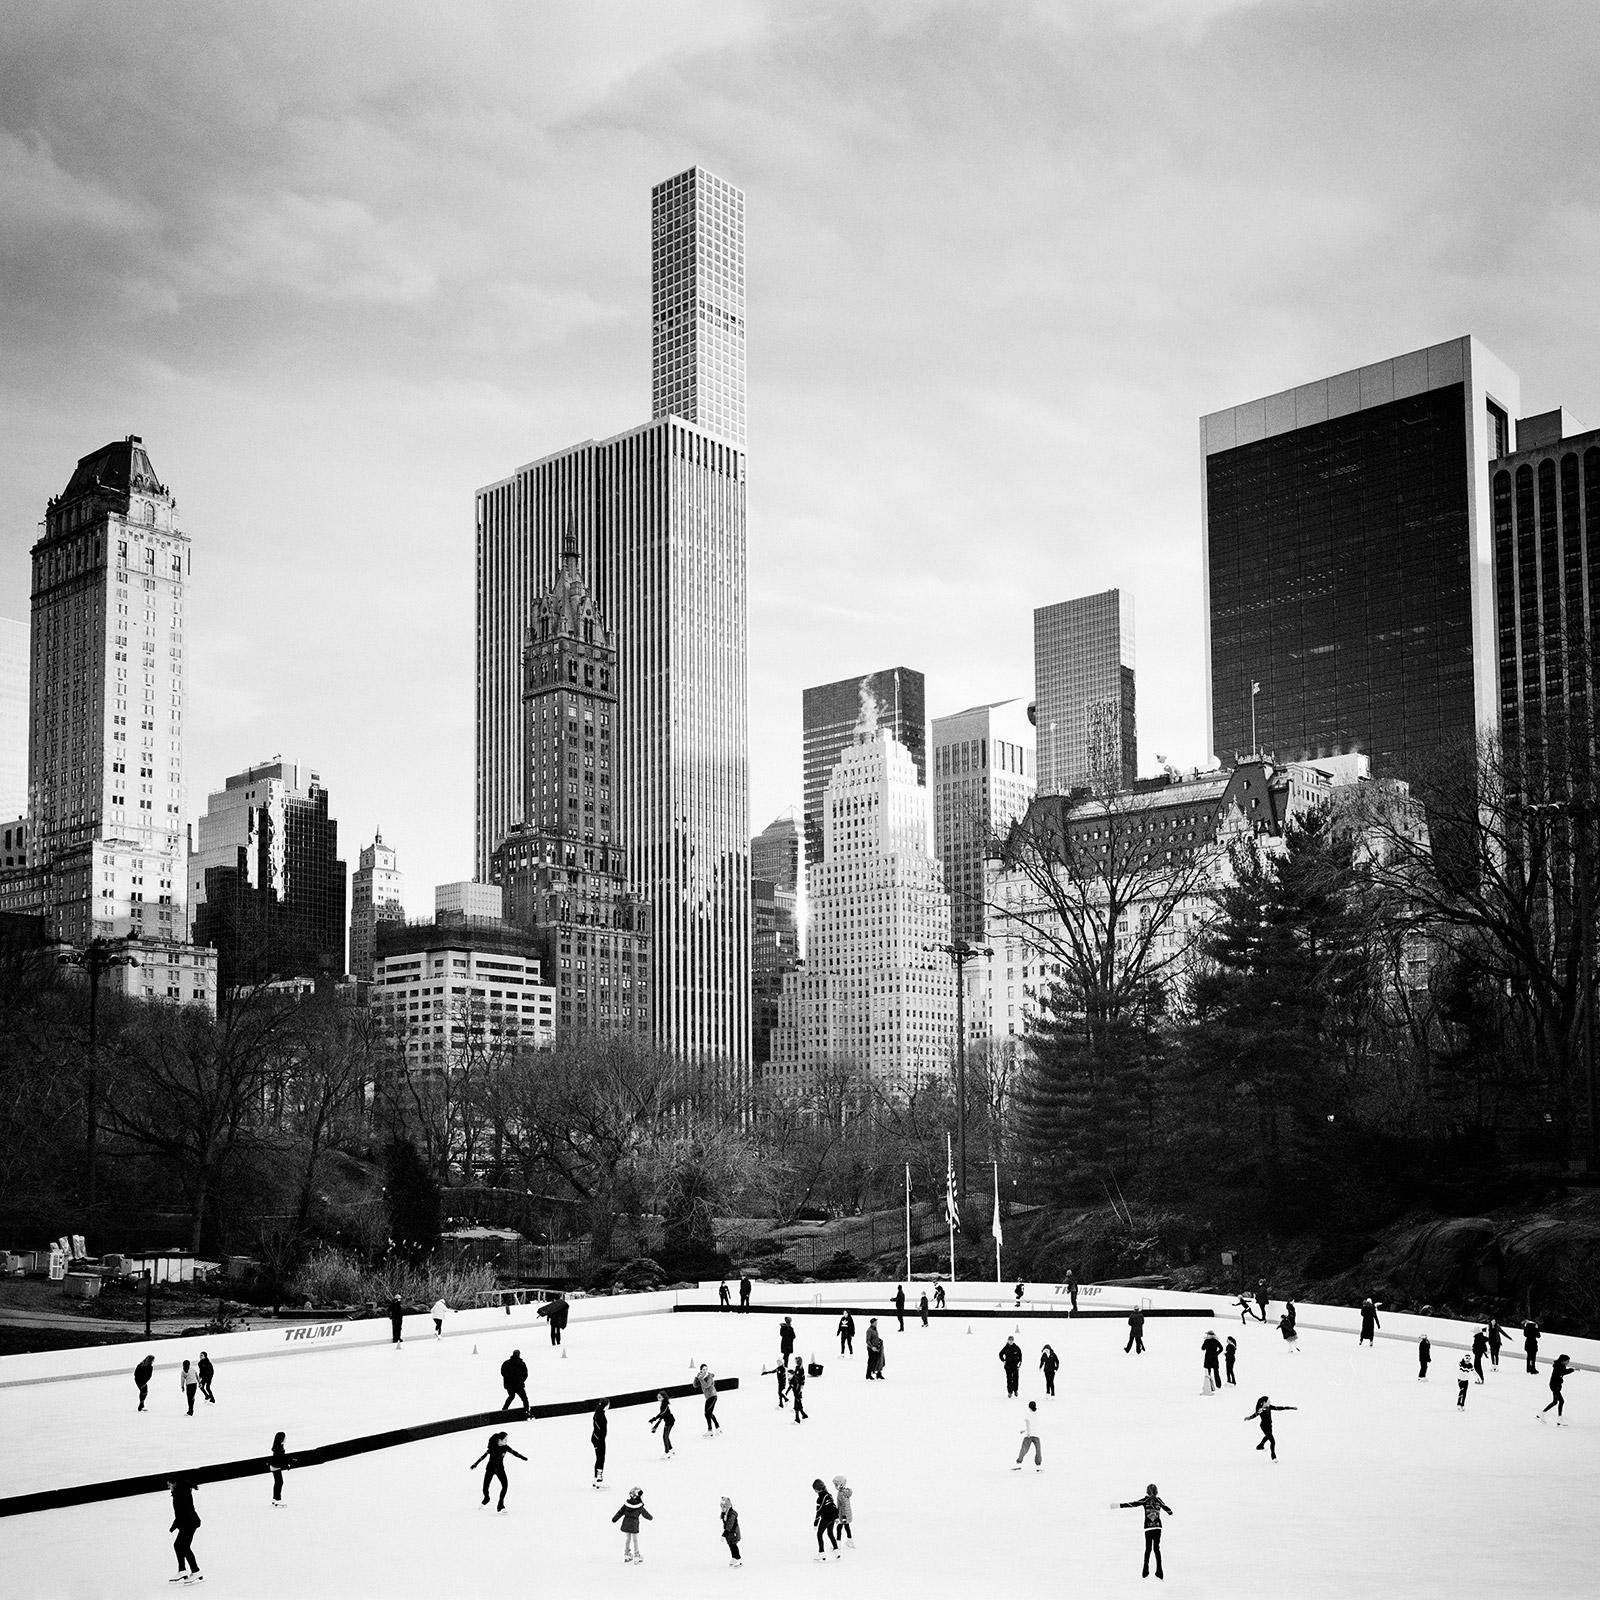 Gerald Berghammer Landscape Photograph - Dancing on Ice, skyscraper, New York, USA, black and white photography cityscape